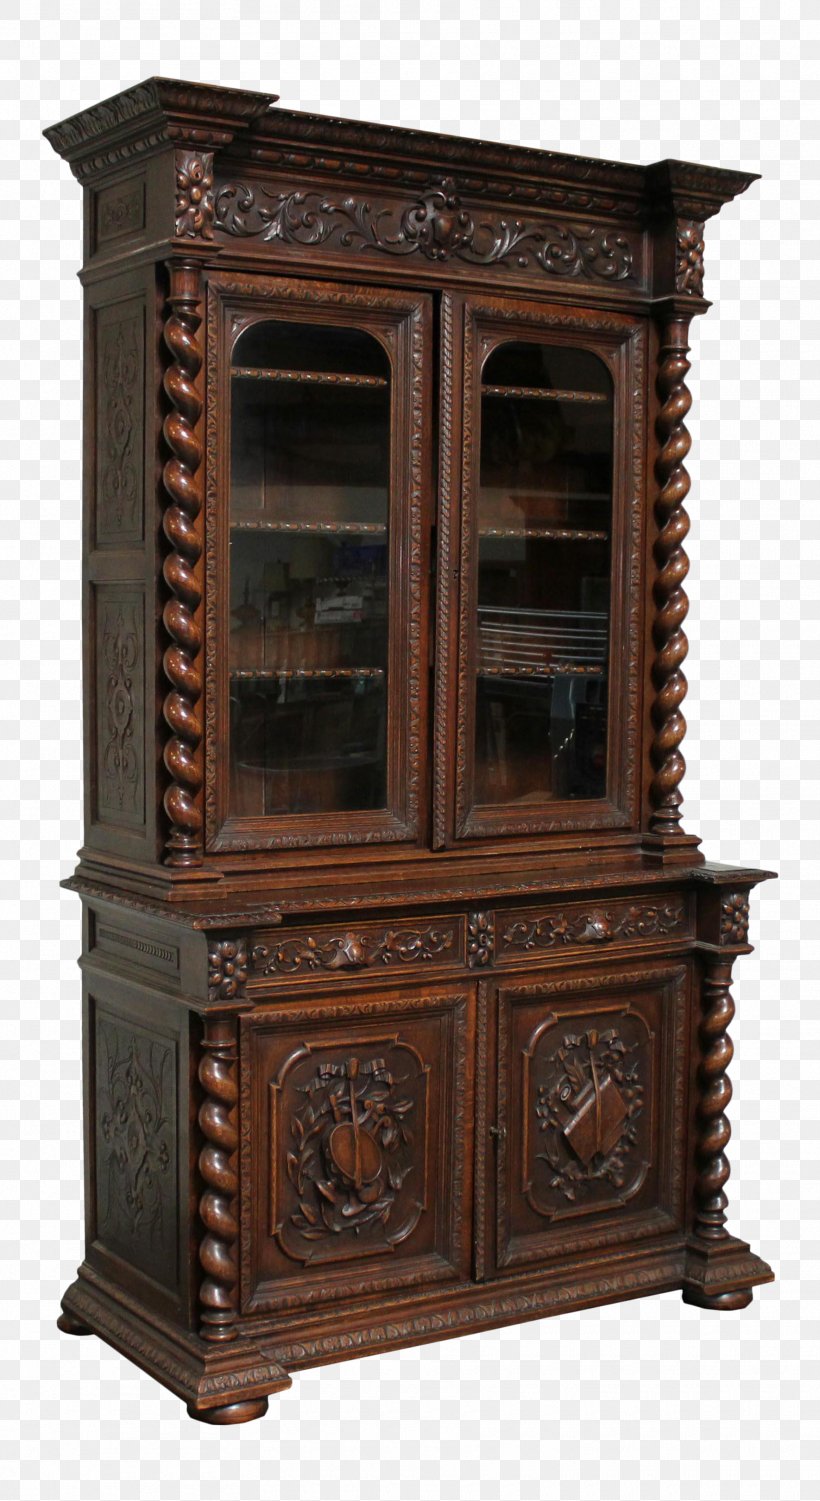 Hutch Closet Cabinetry Welsh Dresser Furniture, PNG, 1770x3242px, Hutch, Antique, Cabinetry, Chiffonier, China Cabinet Download Free